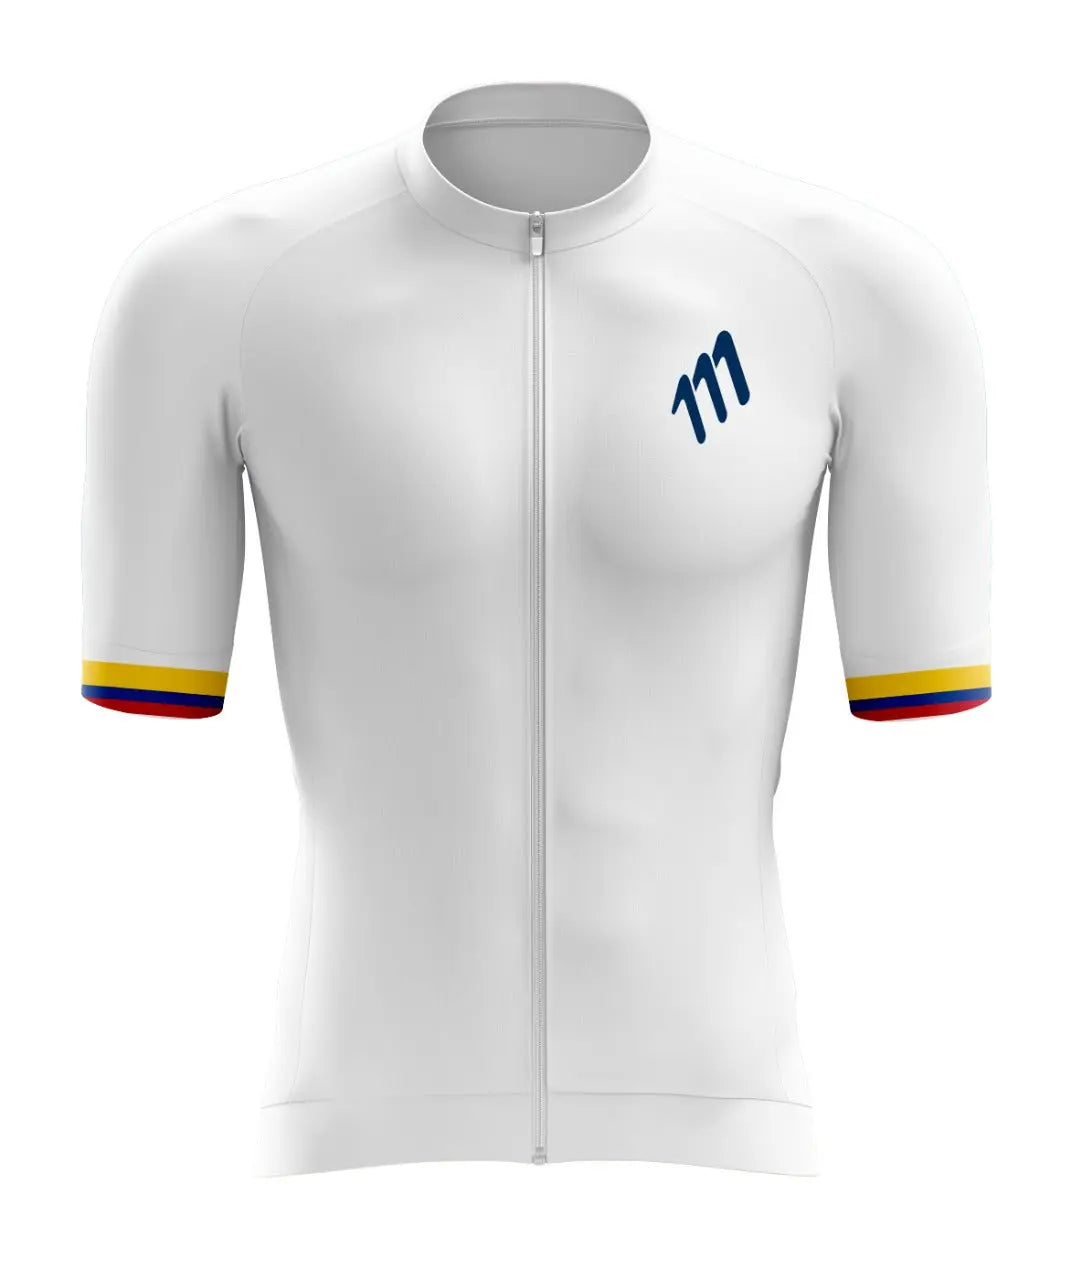 Jersey Colombia women 111 Cientonce